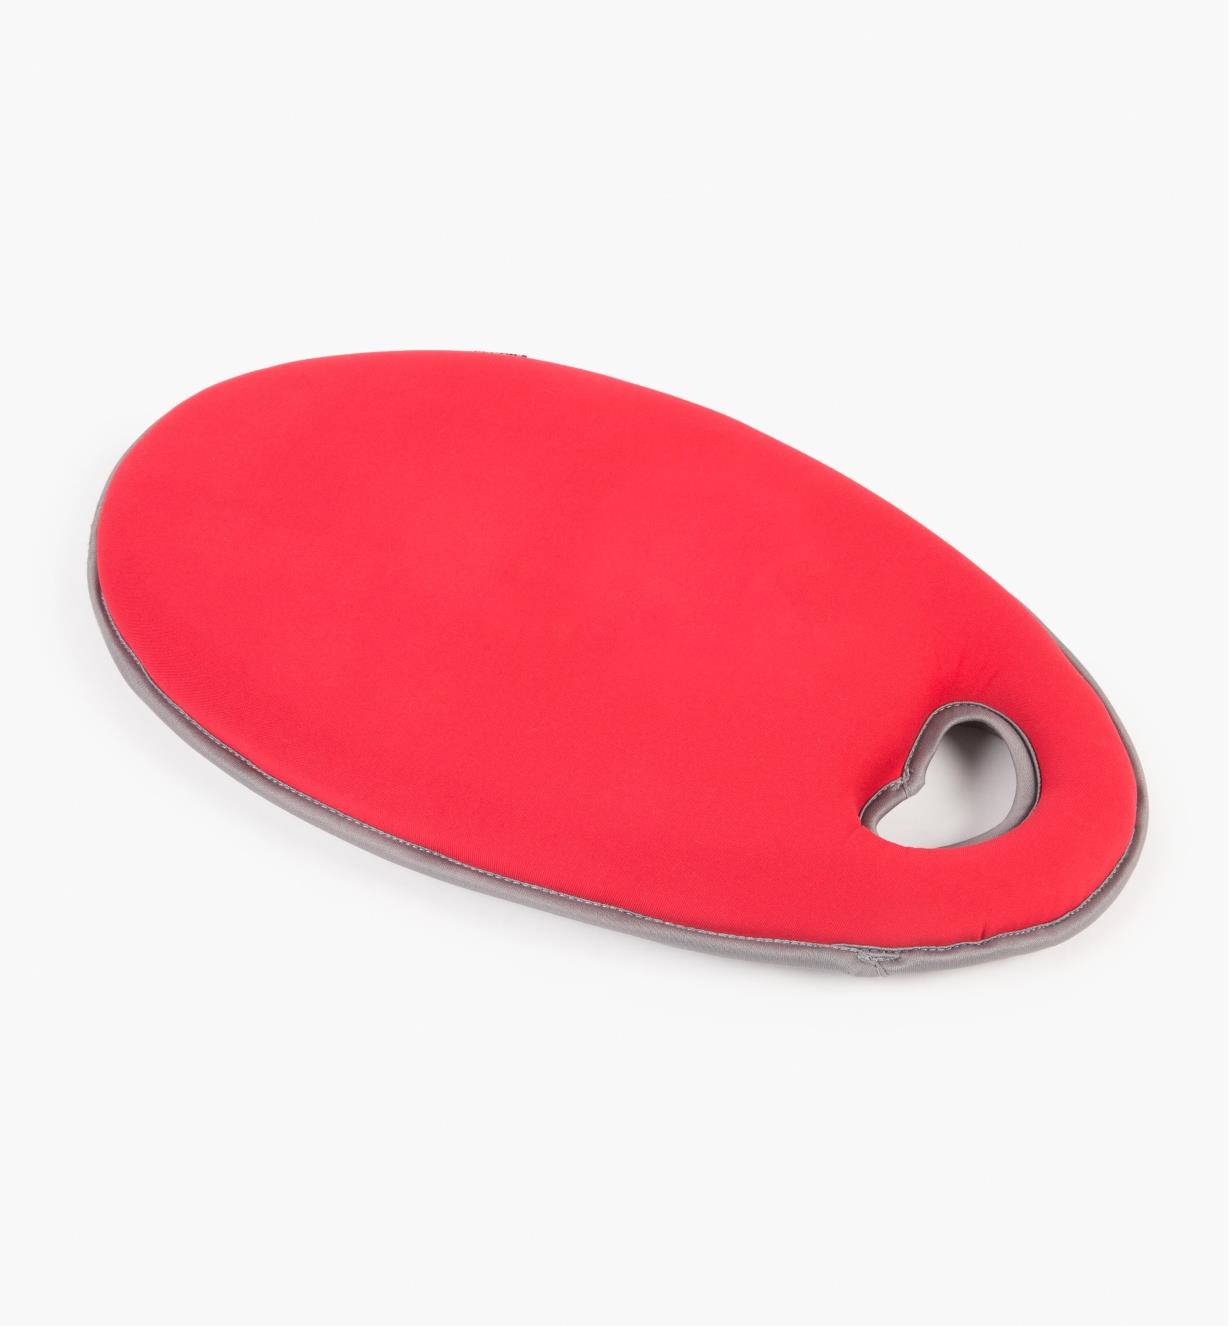 EE116 - Coussin pour genoux, rouge